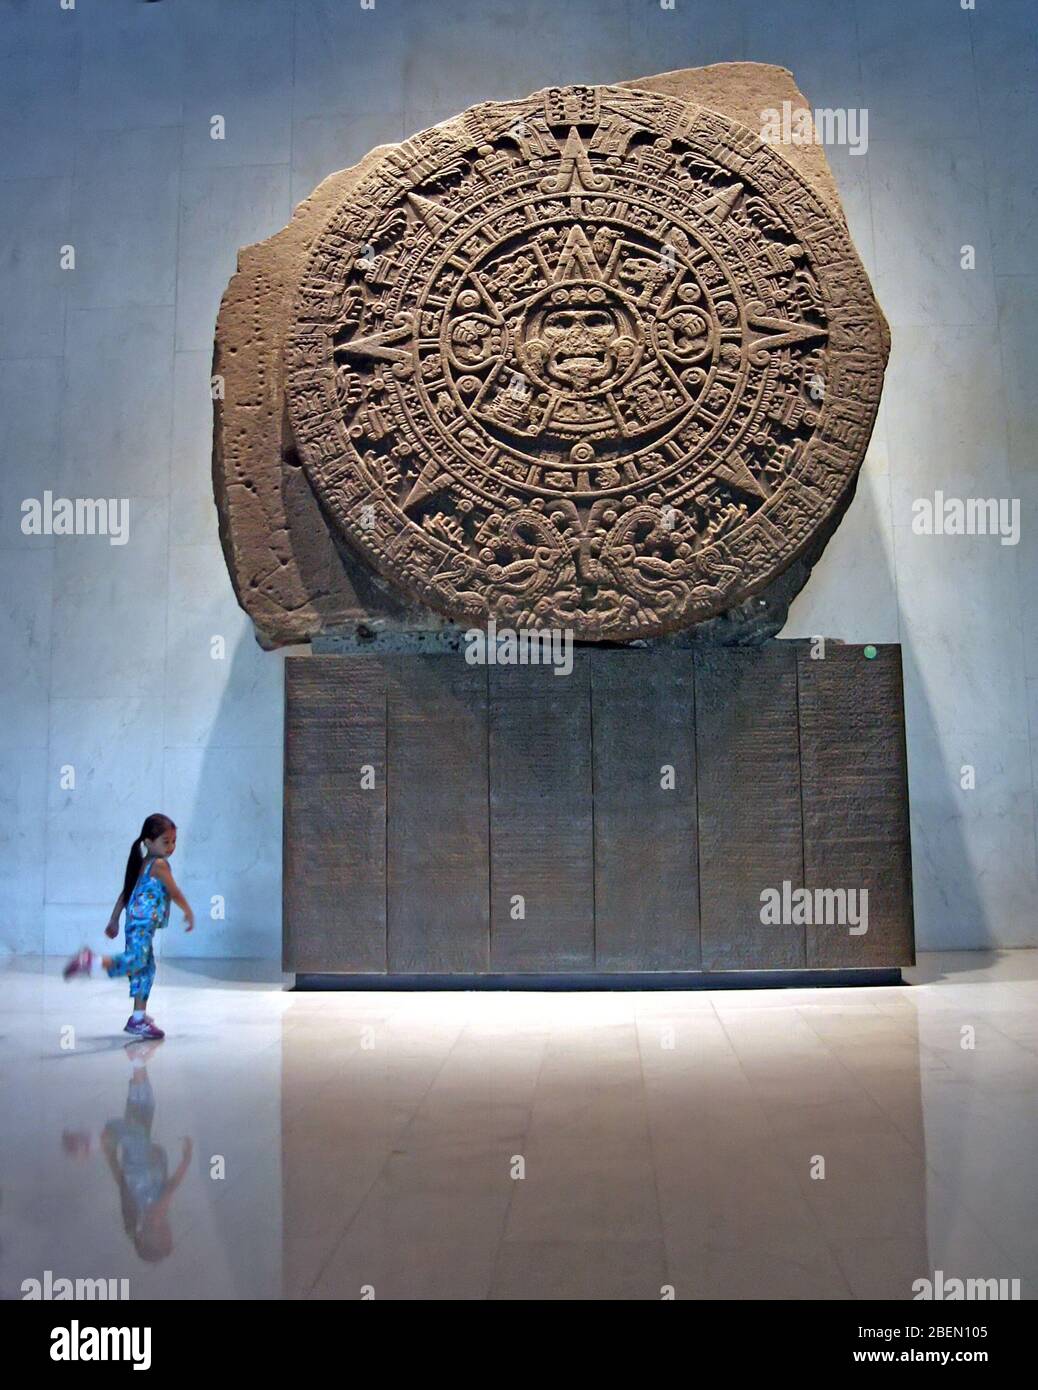 Young girl dances in front of the Sun Stone in Anthropology Museum, Mexico City, Mexico Stock Photo